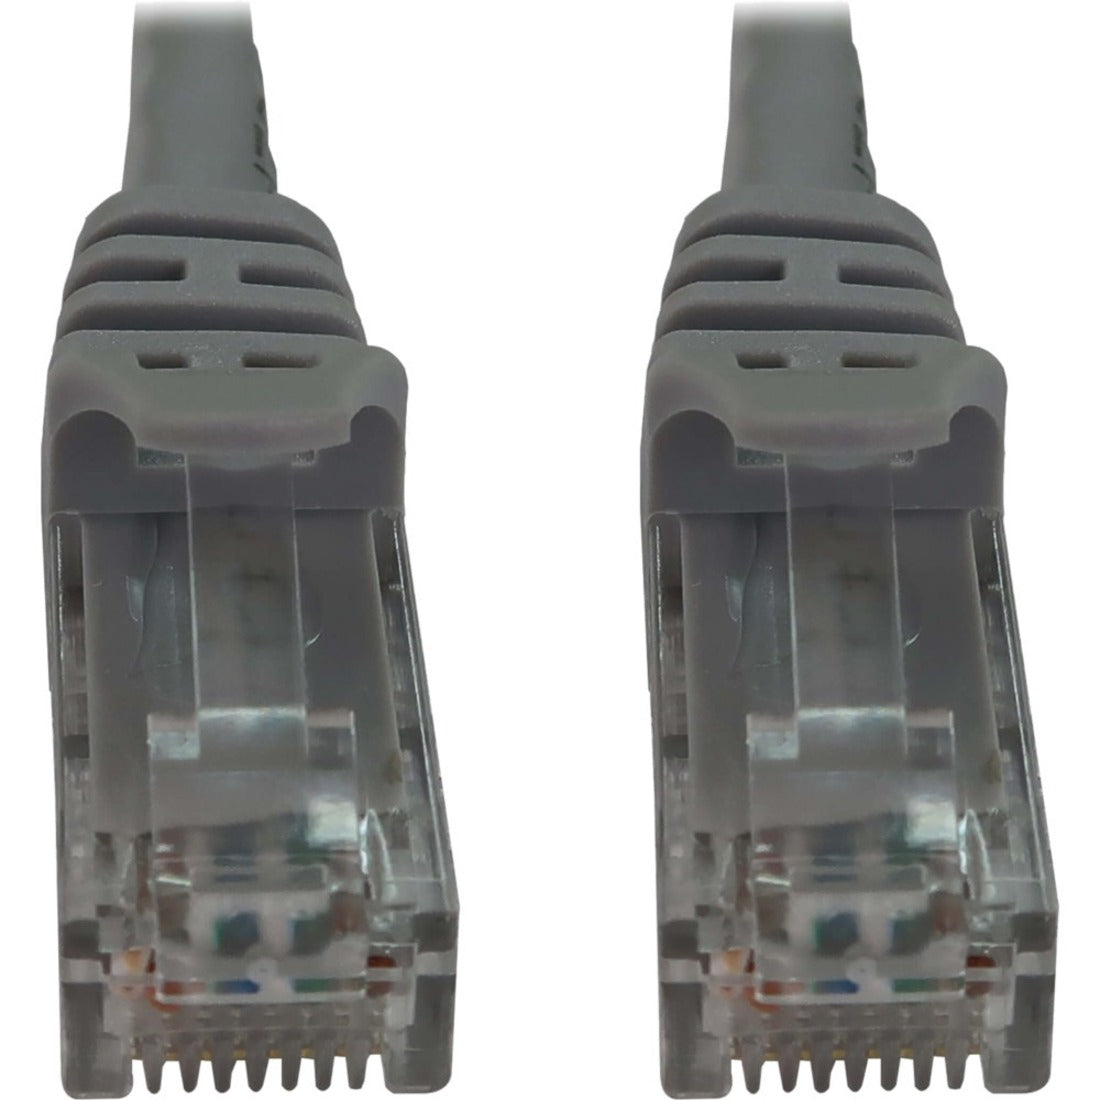 Tripp Lite N261-050-GY Cat.6a UTP Network Cable, 10G PoE, Gray, 50ft